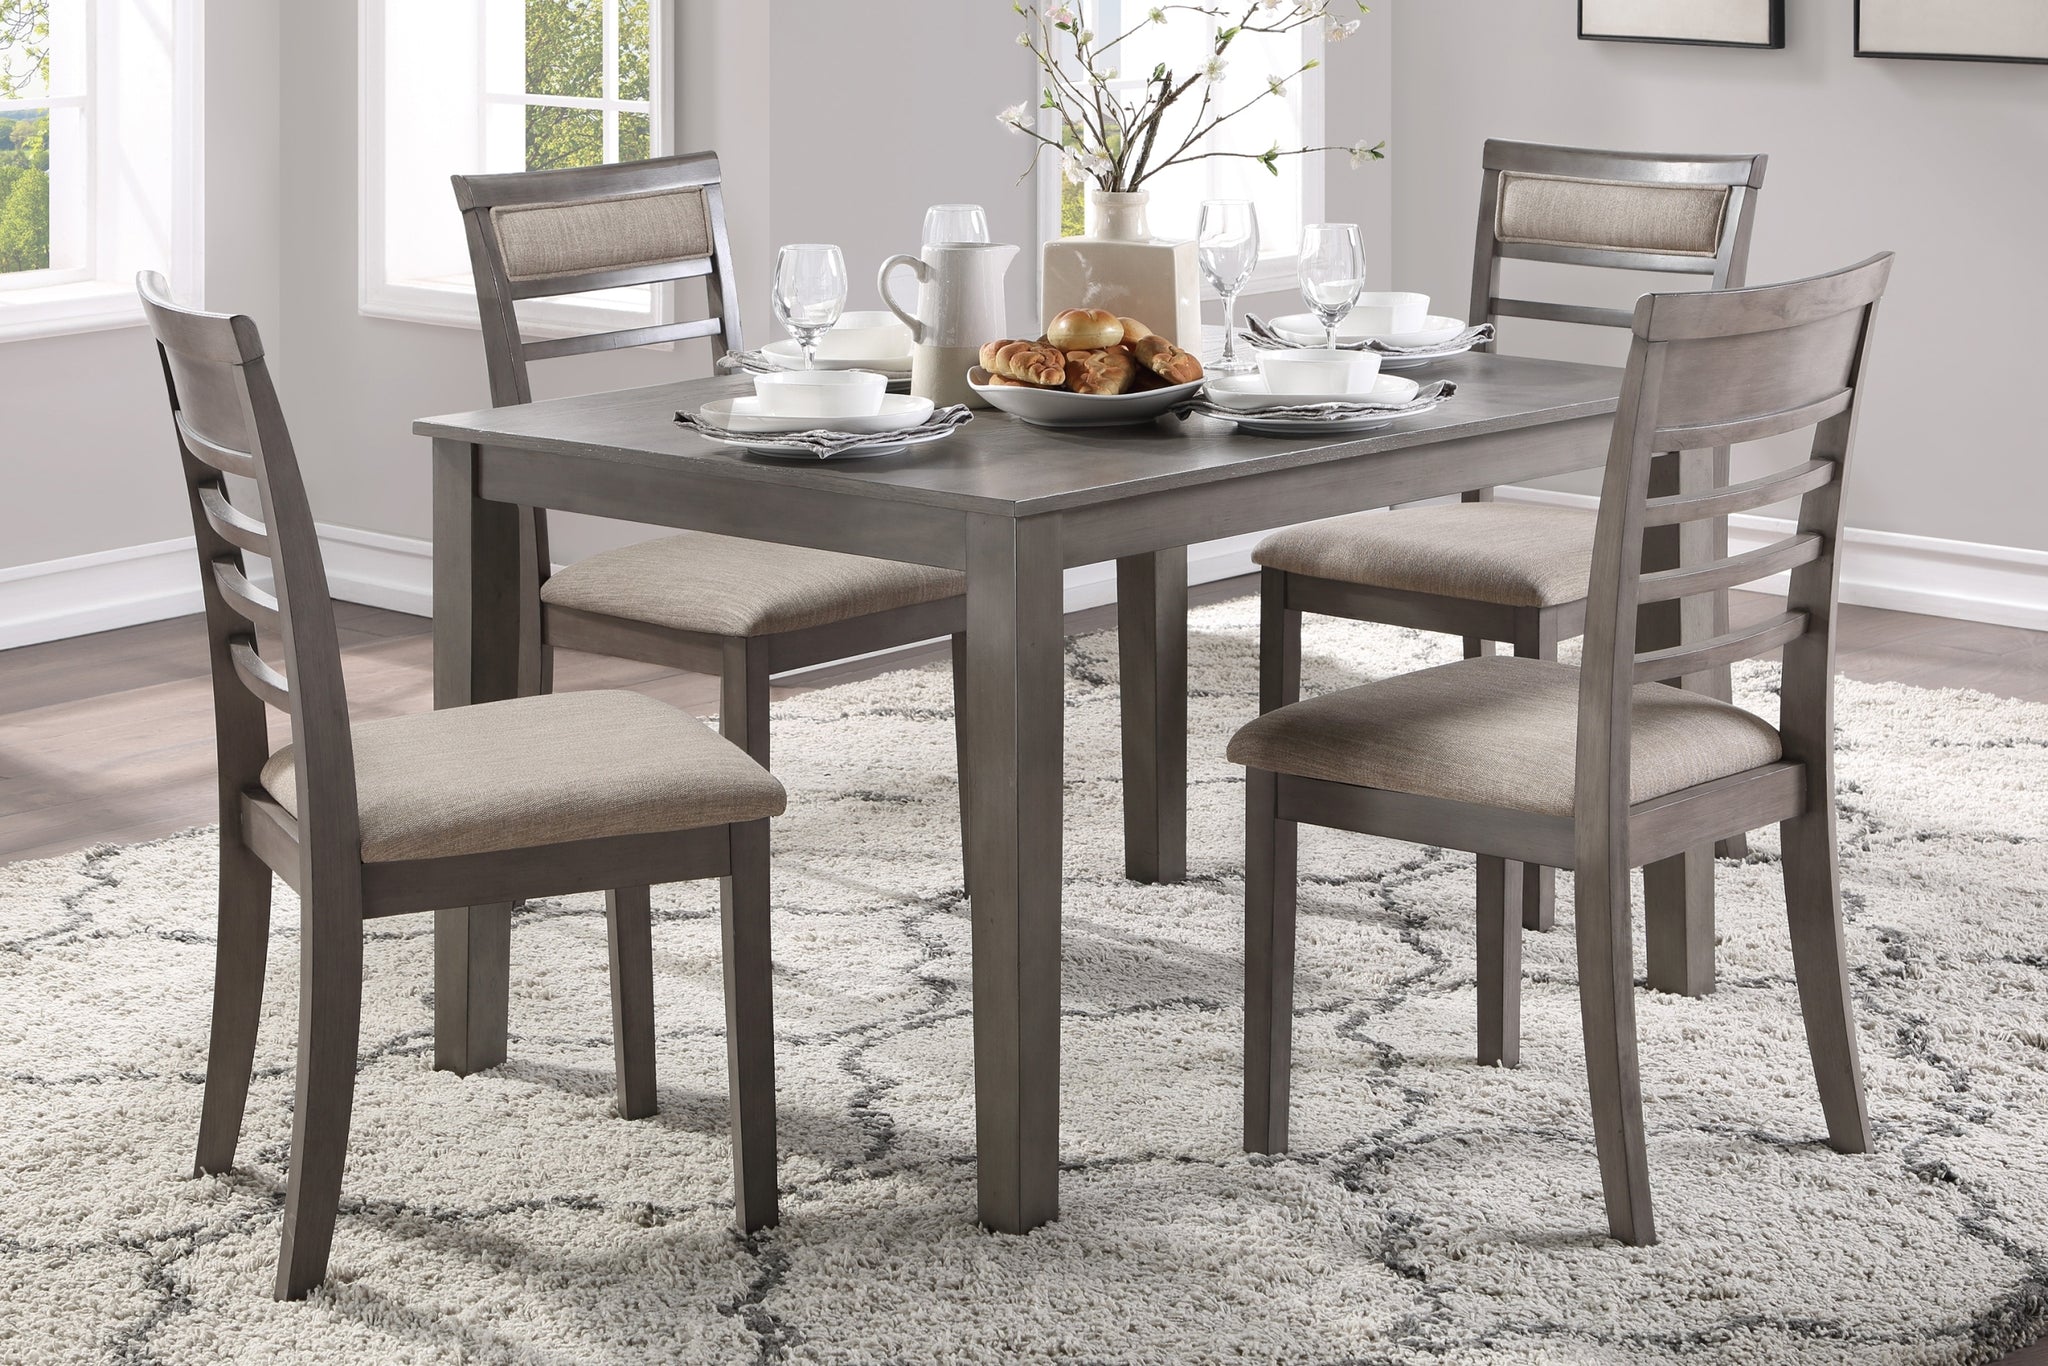 Beautiful Gray Finish 5pc Dining Set Table and 4 Side wood-wood-gray-seats 4-wood-dining room-48